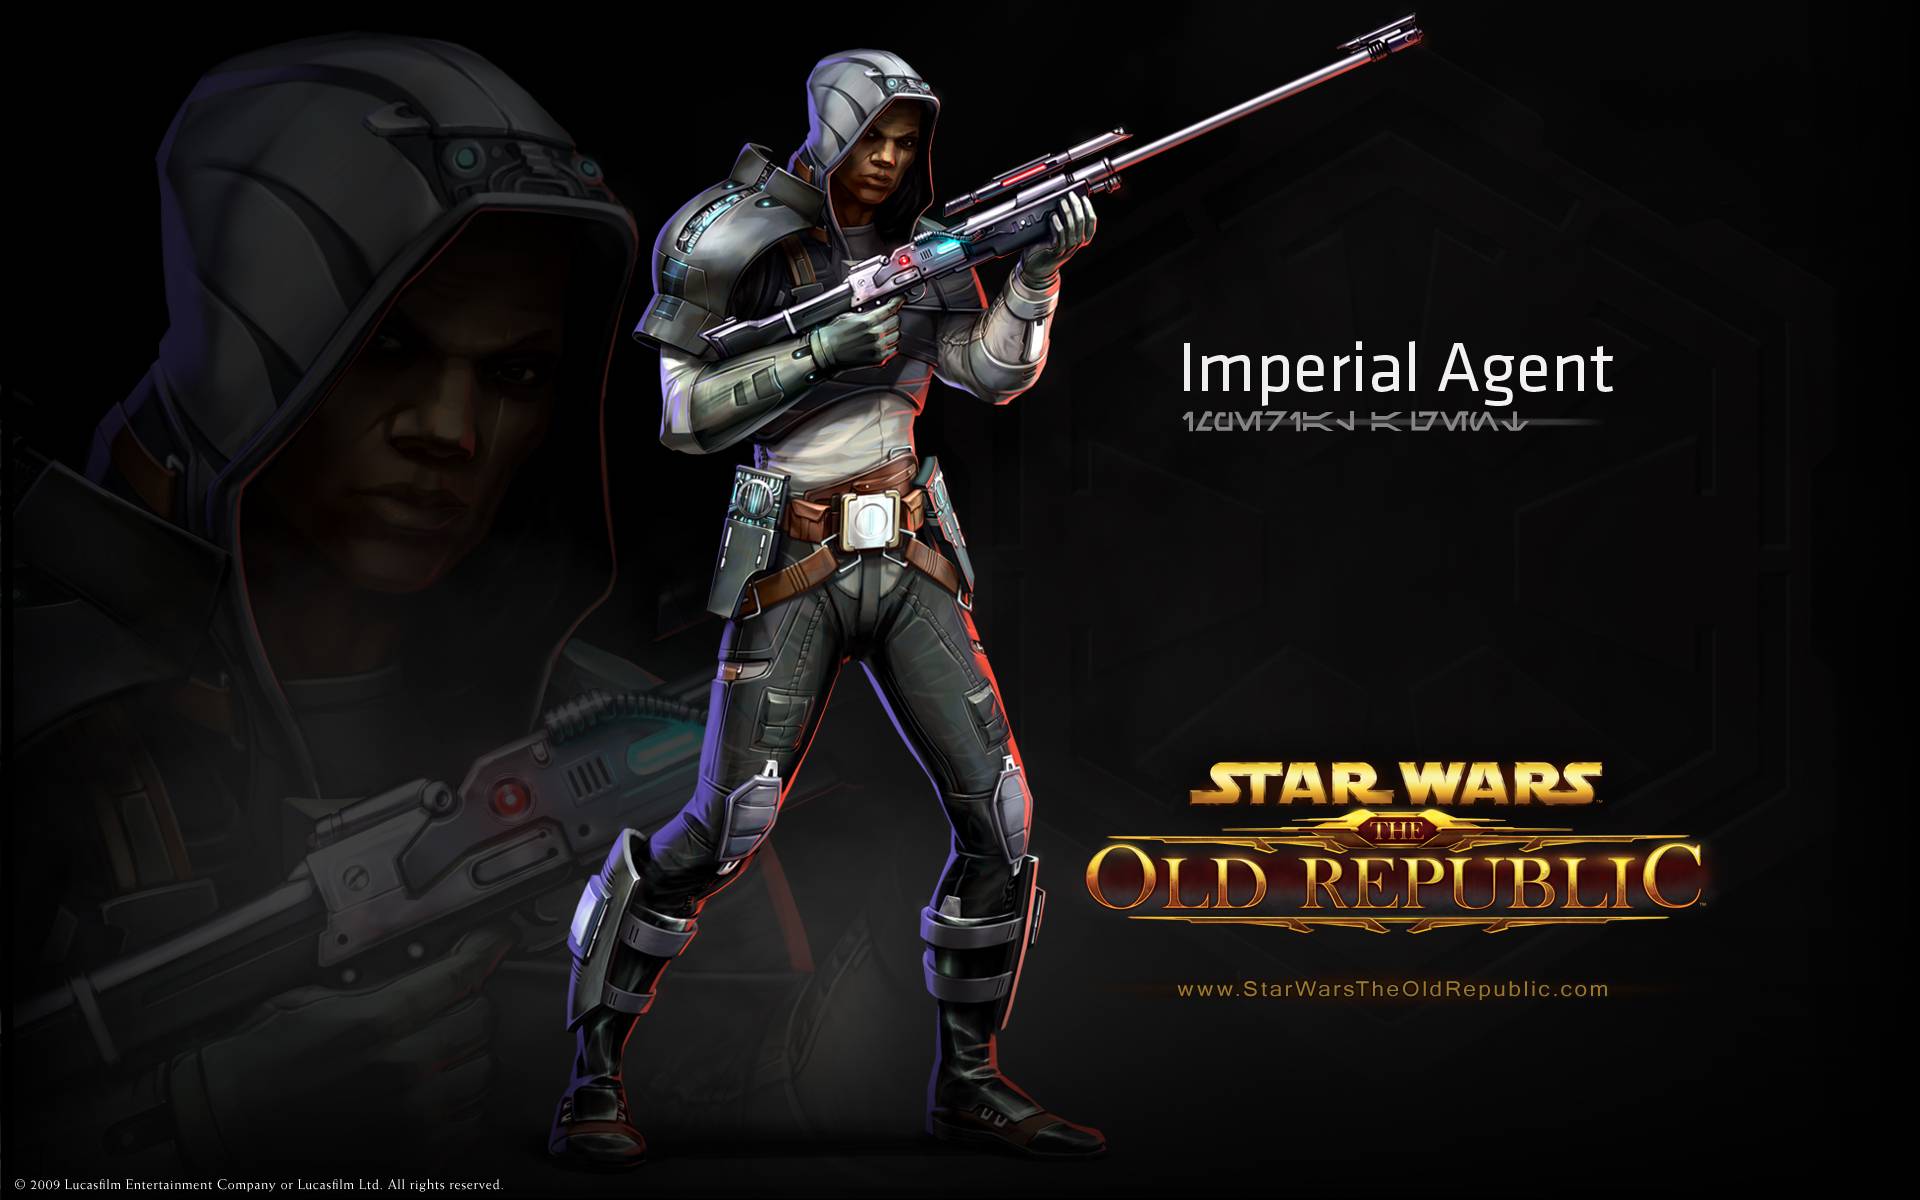 Swtor Imperial Agent Official Wallpaper